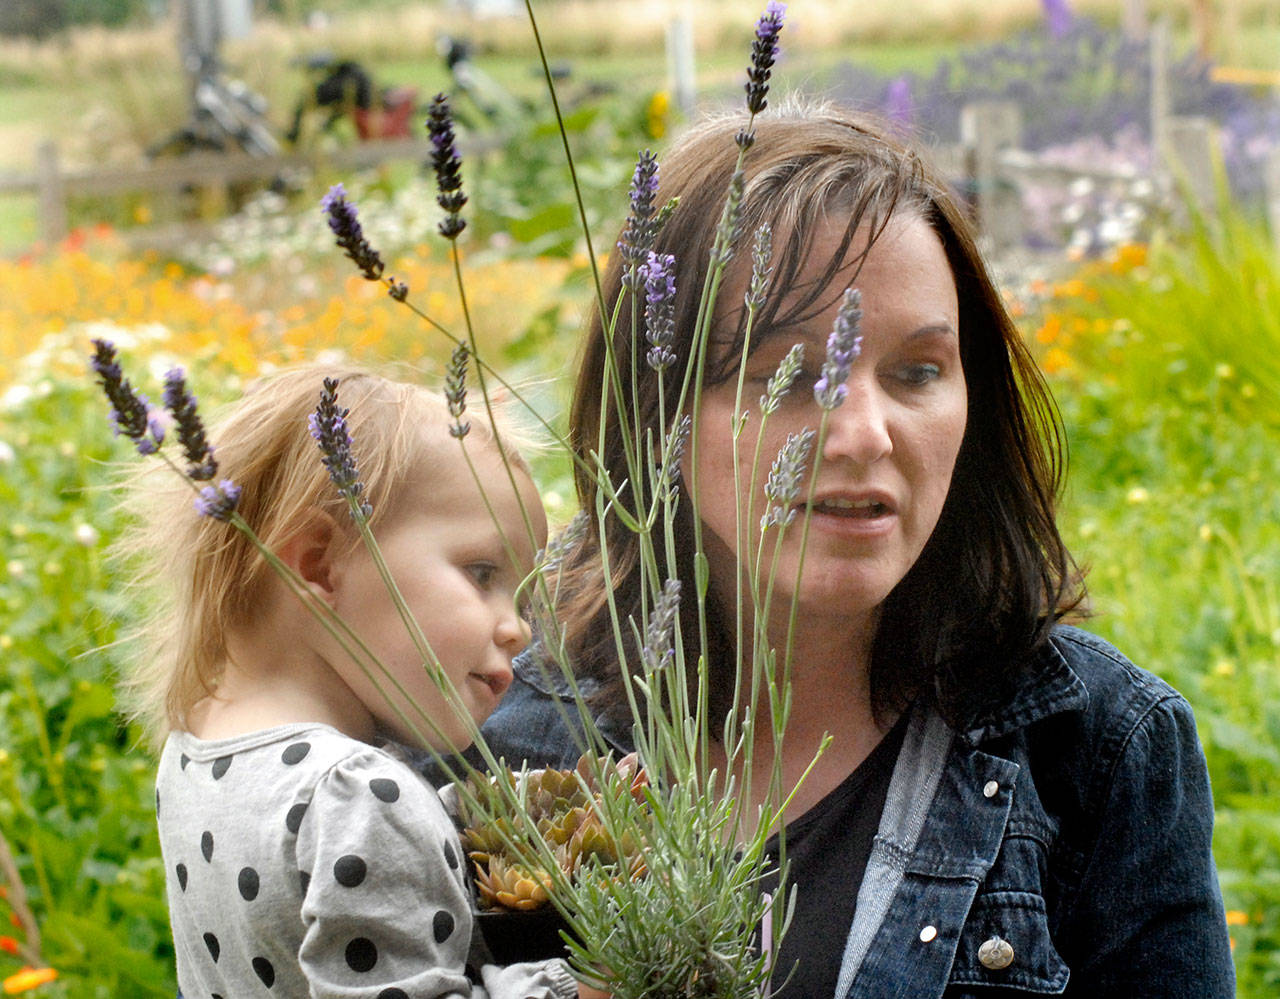 Rebecca Archuleta of Yakima holds her niece, Lilly Ballamis, 2, of Port Angeles, and a lavender plant for purchase Friday at Fat Cat Garden & Gifts in Sequim. (Keith Thorpe/Peninsula Daily News)